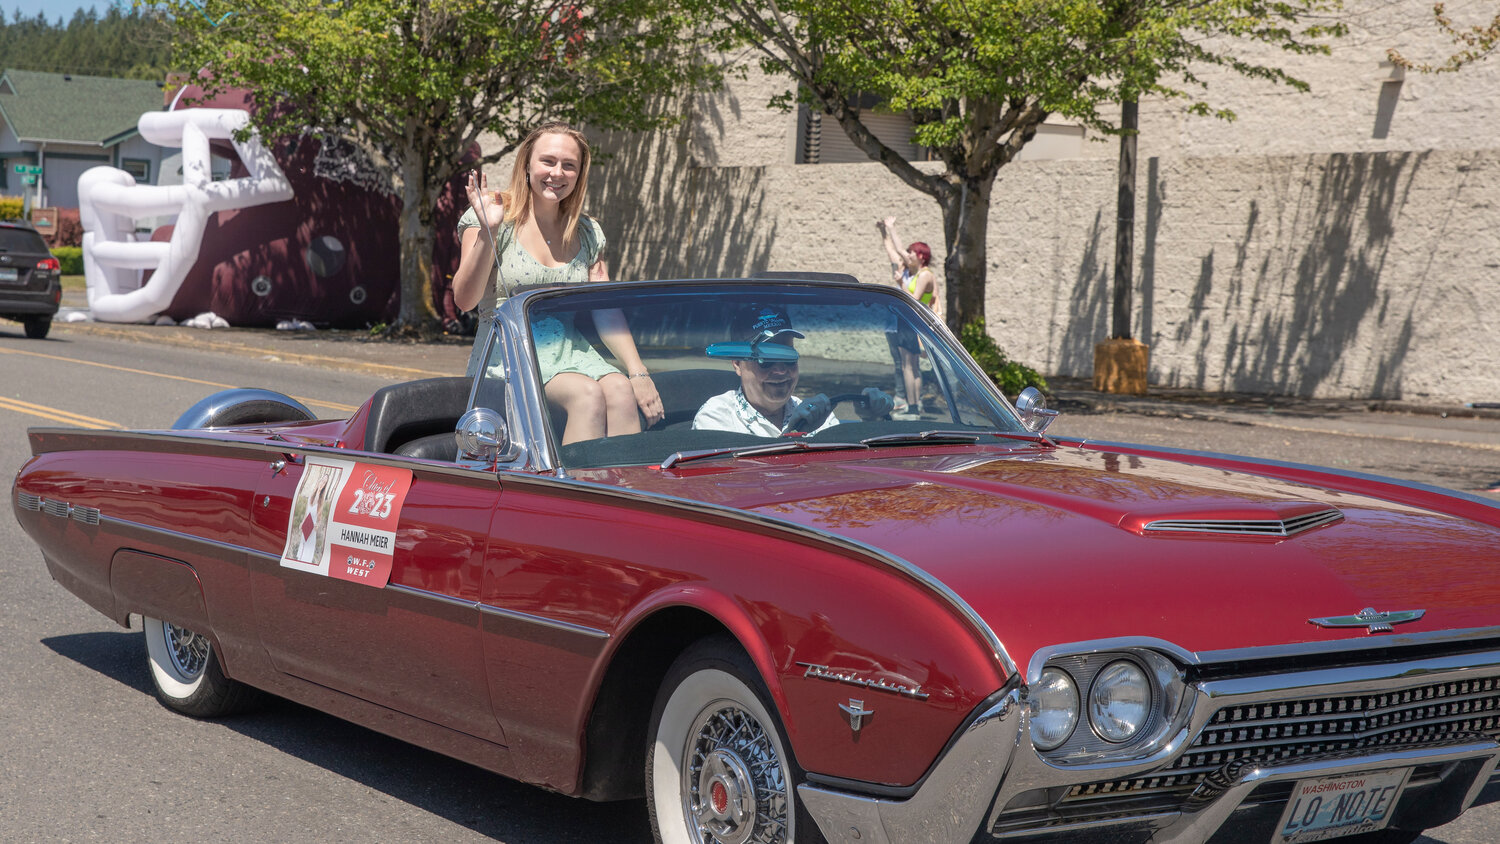 W.F. West High School senior Hannah Meier smiles and waves from a Thunderbird during a parade honoring future graduates in Chehalis on Sunday, June 4.